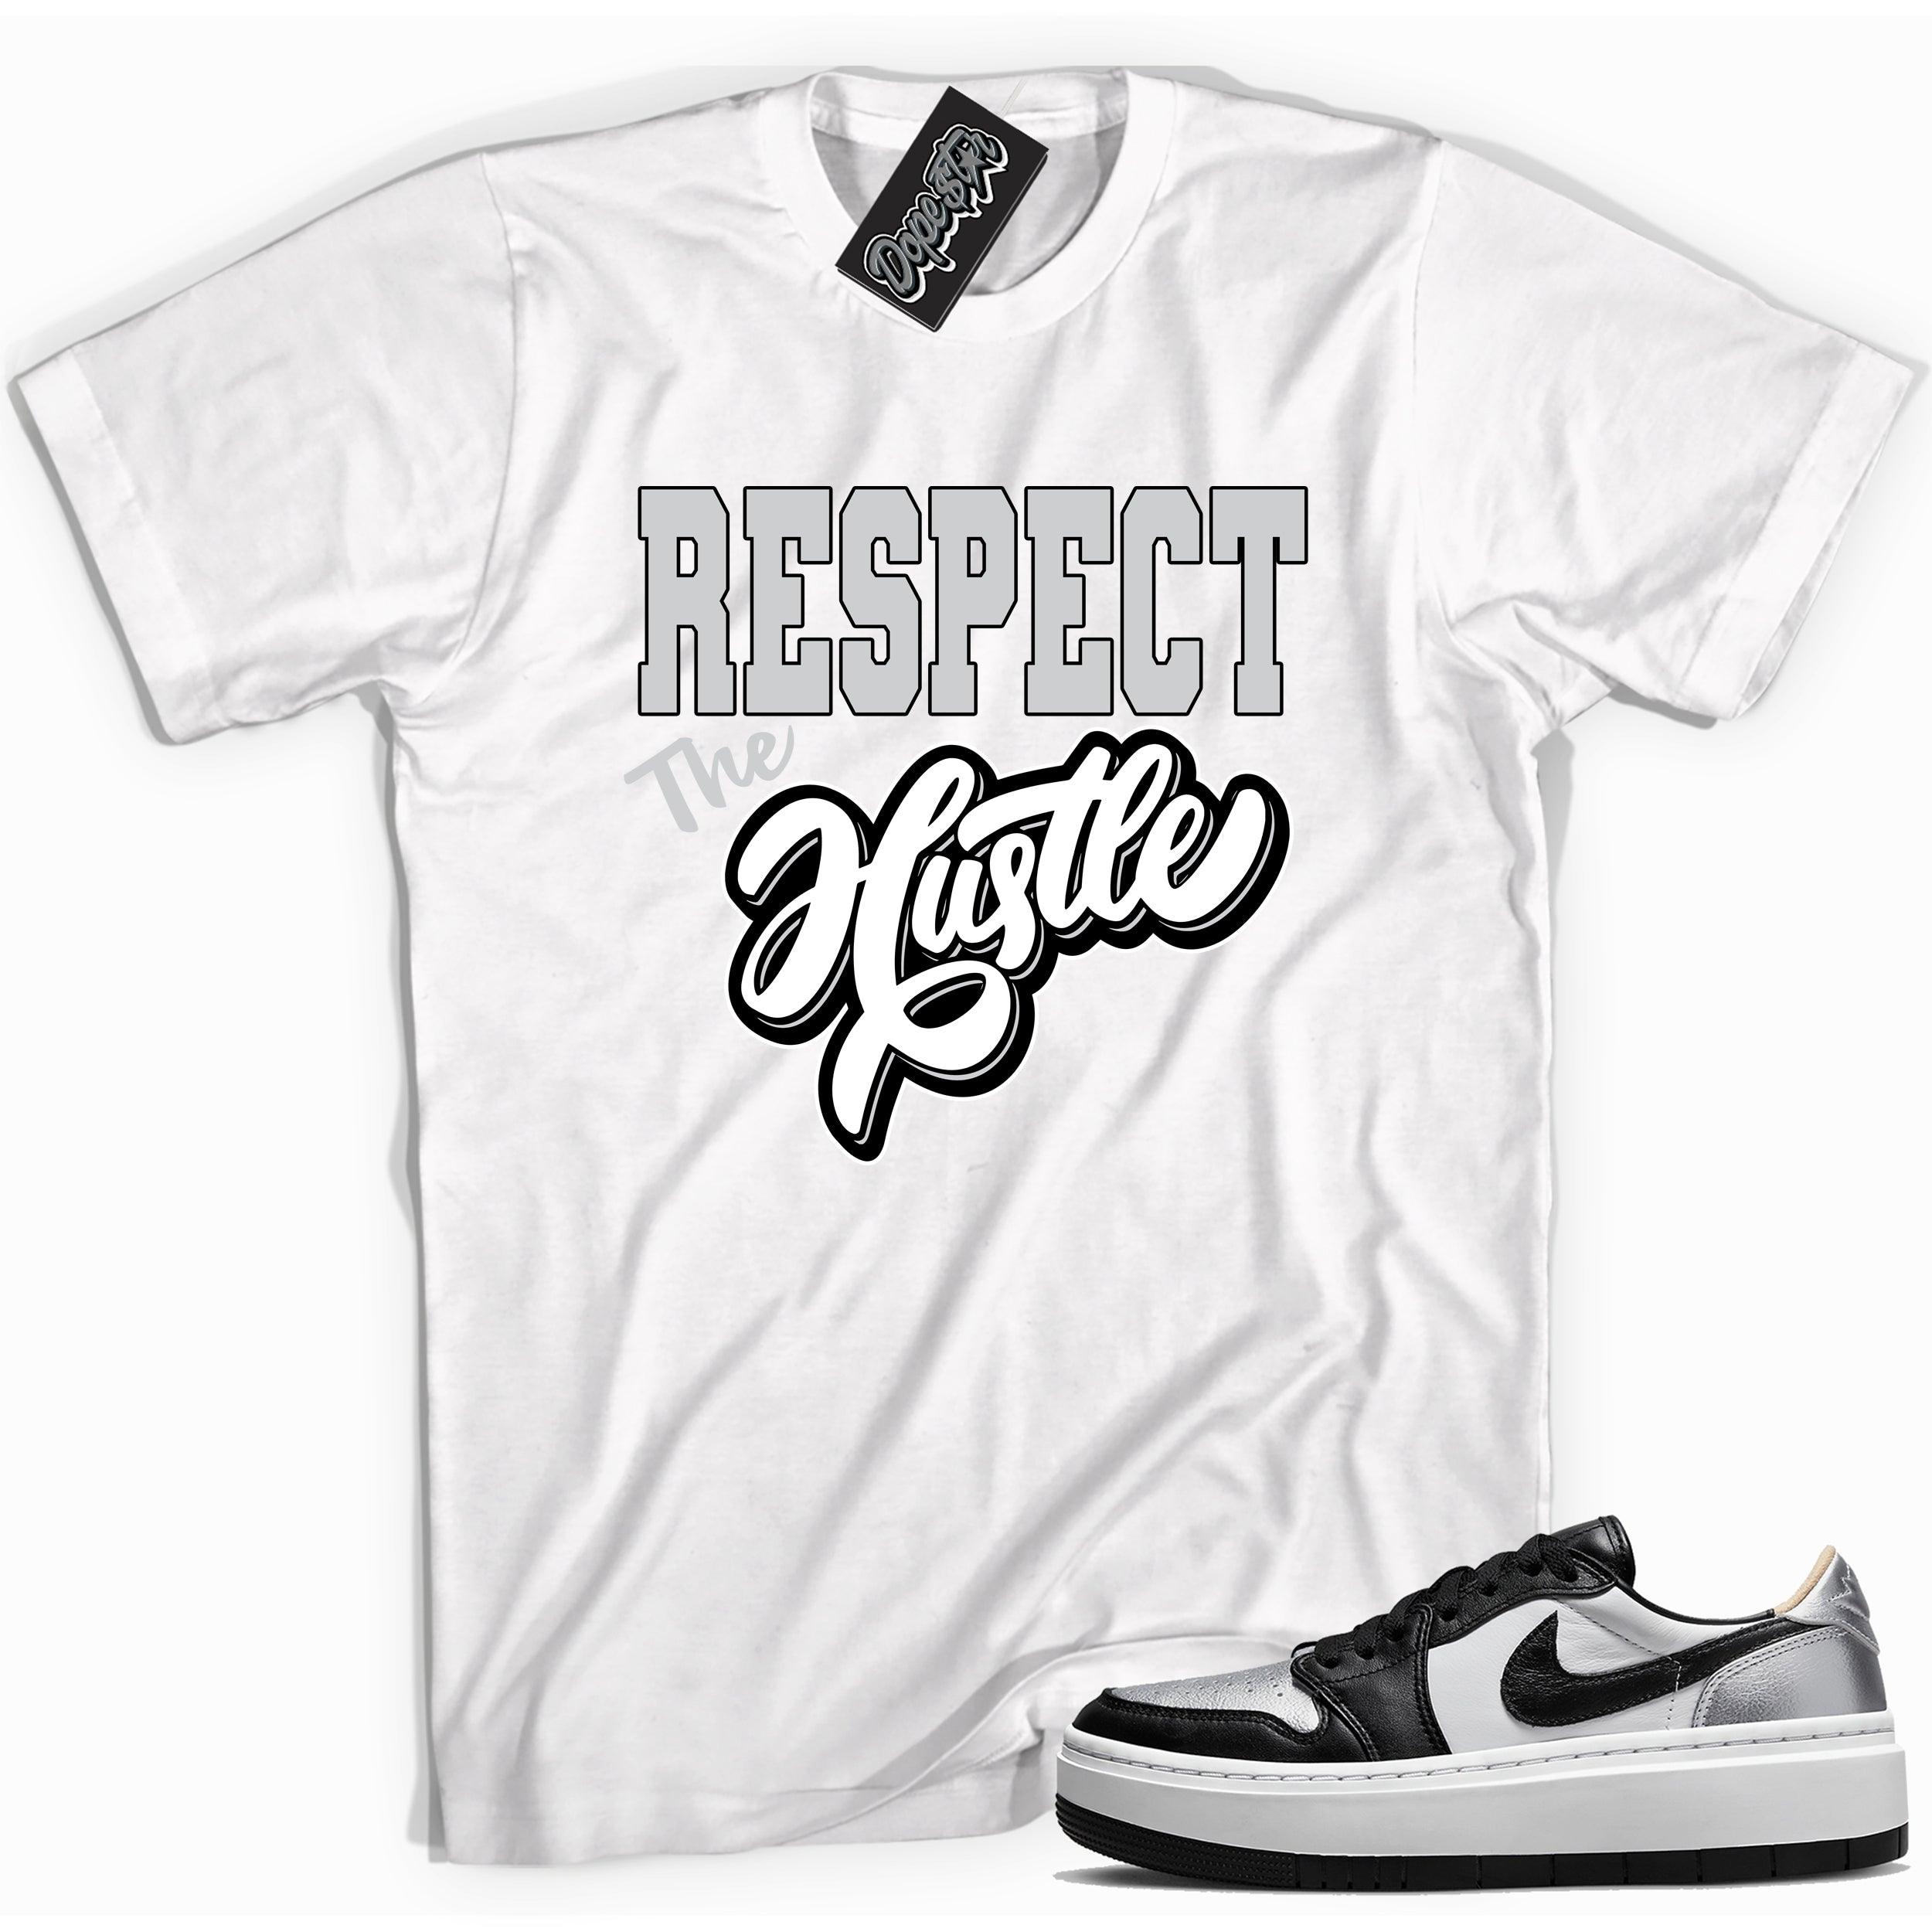 Cool white graphic tee with 'respect the hustle' print, that perfectly matches Air Jordan 1 Elevate Low SE Silver Toe sneakers.